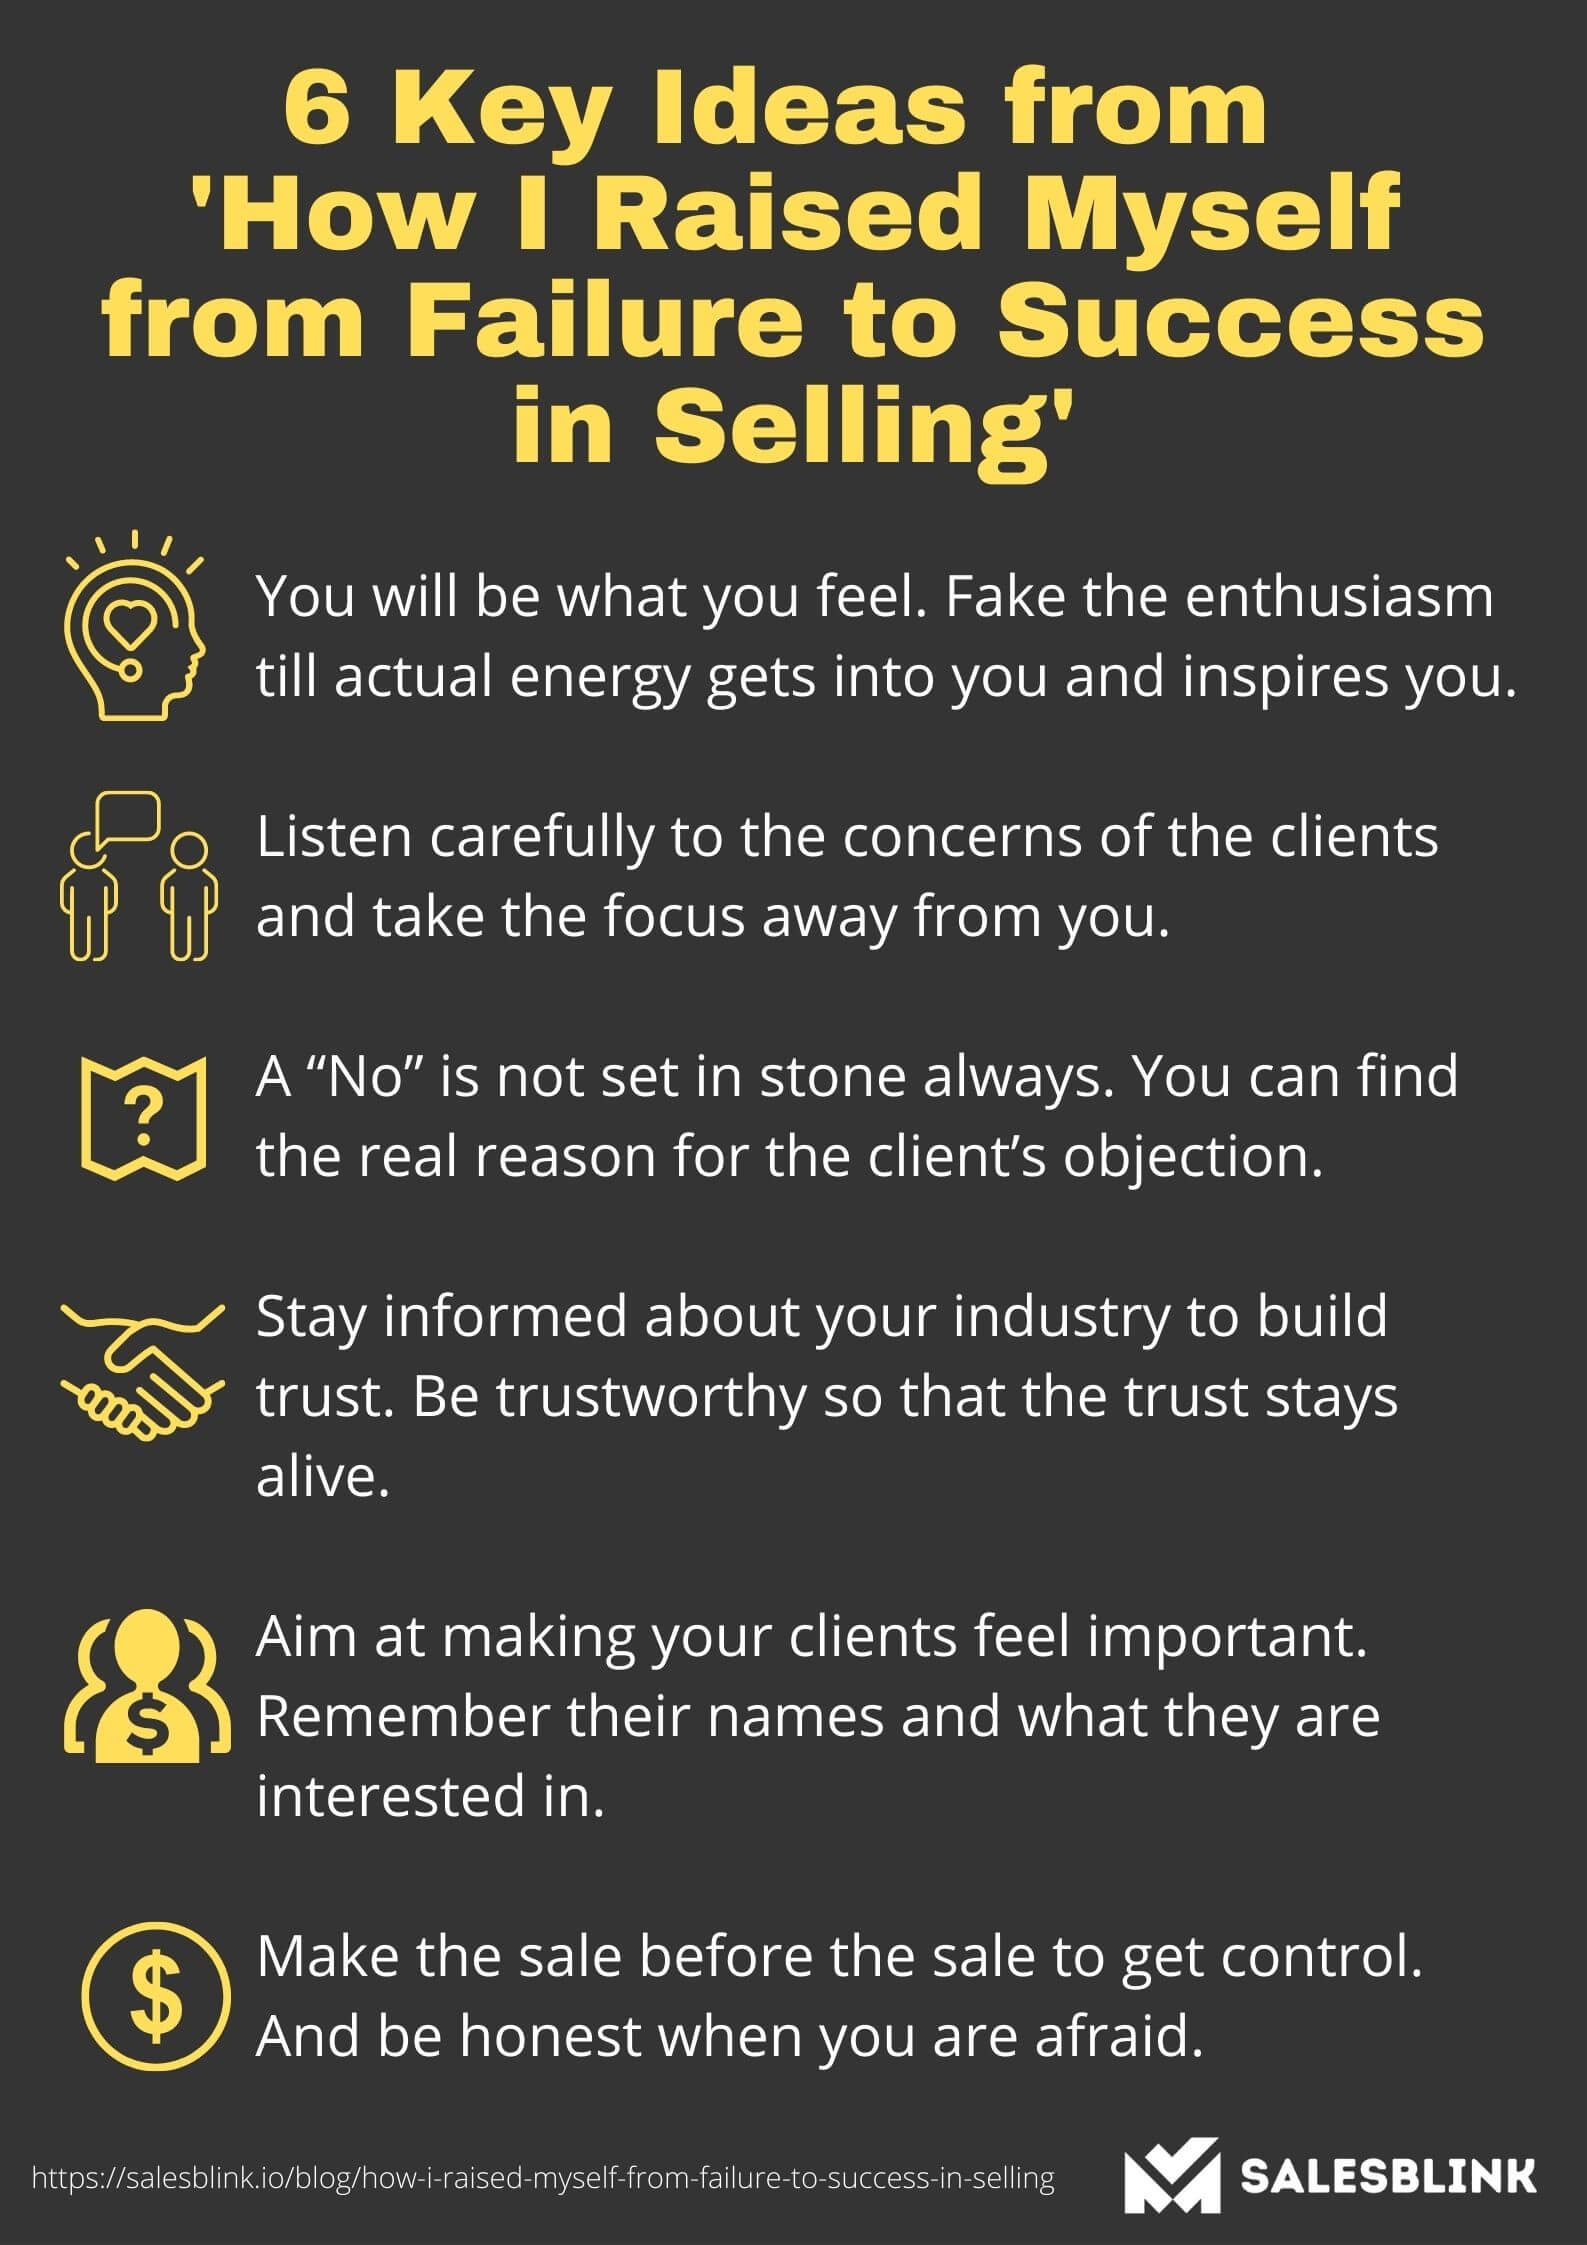 6 Key Ideas from 'How I Raised Myself from Failure to Success in Selling'